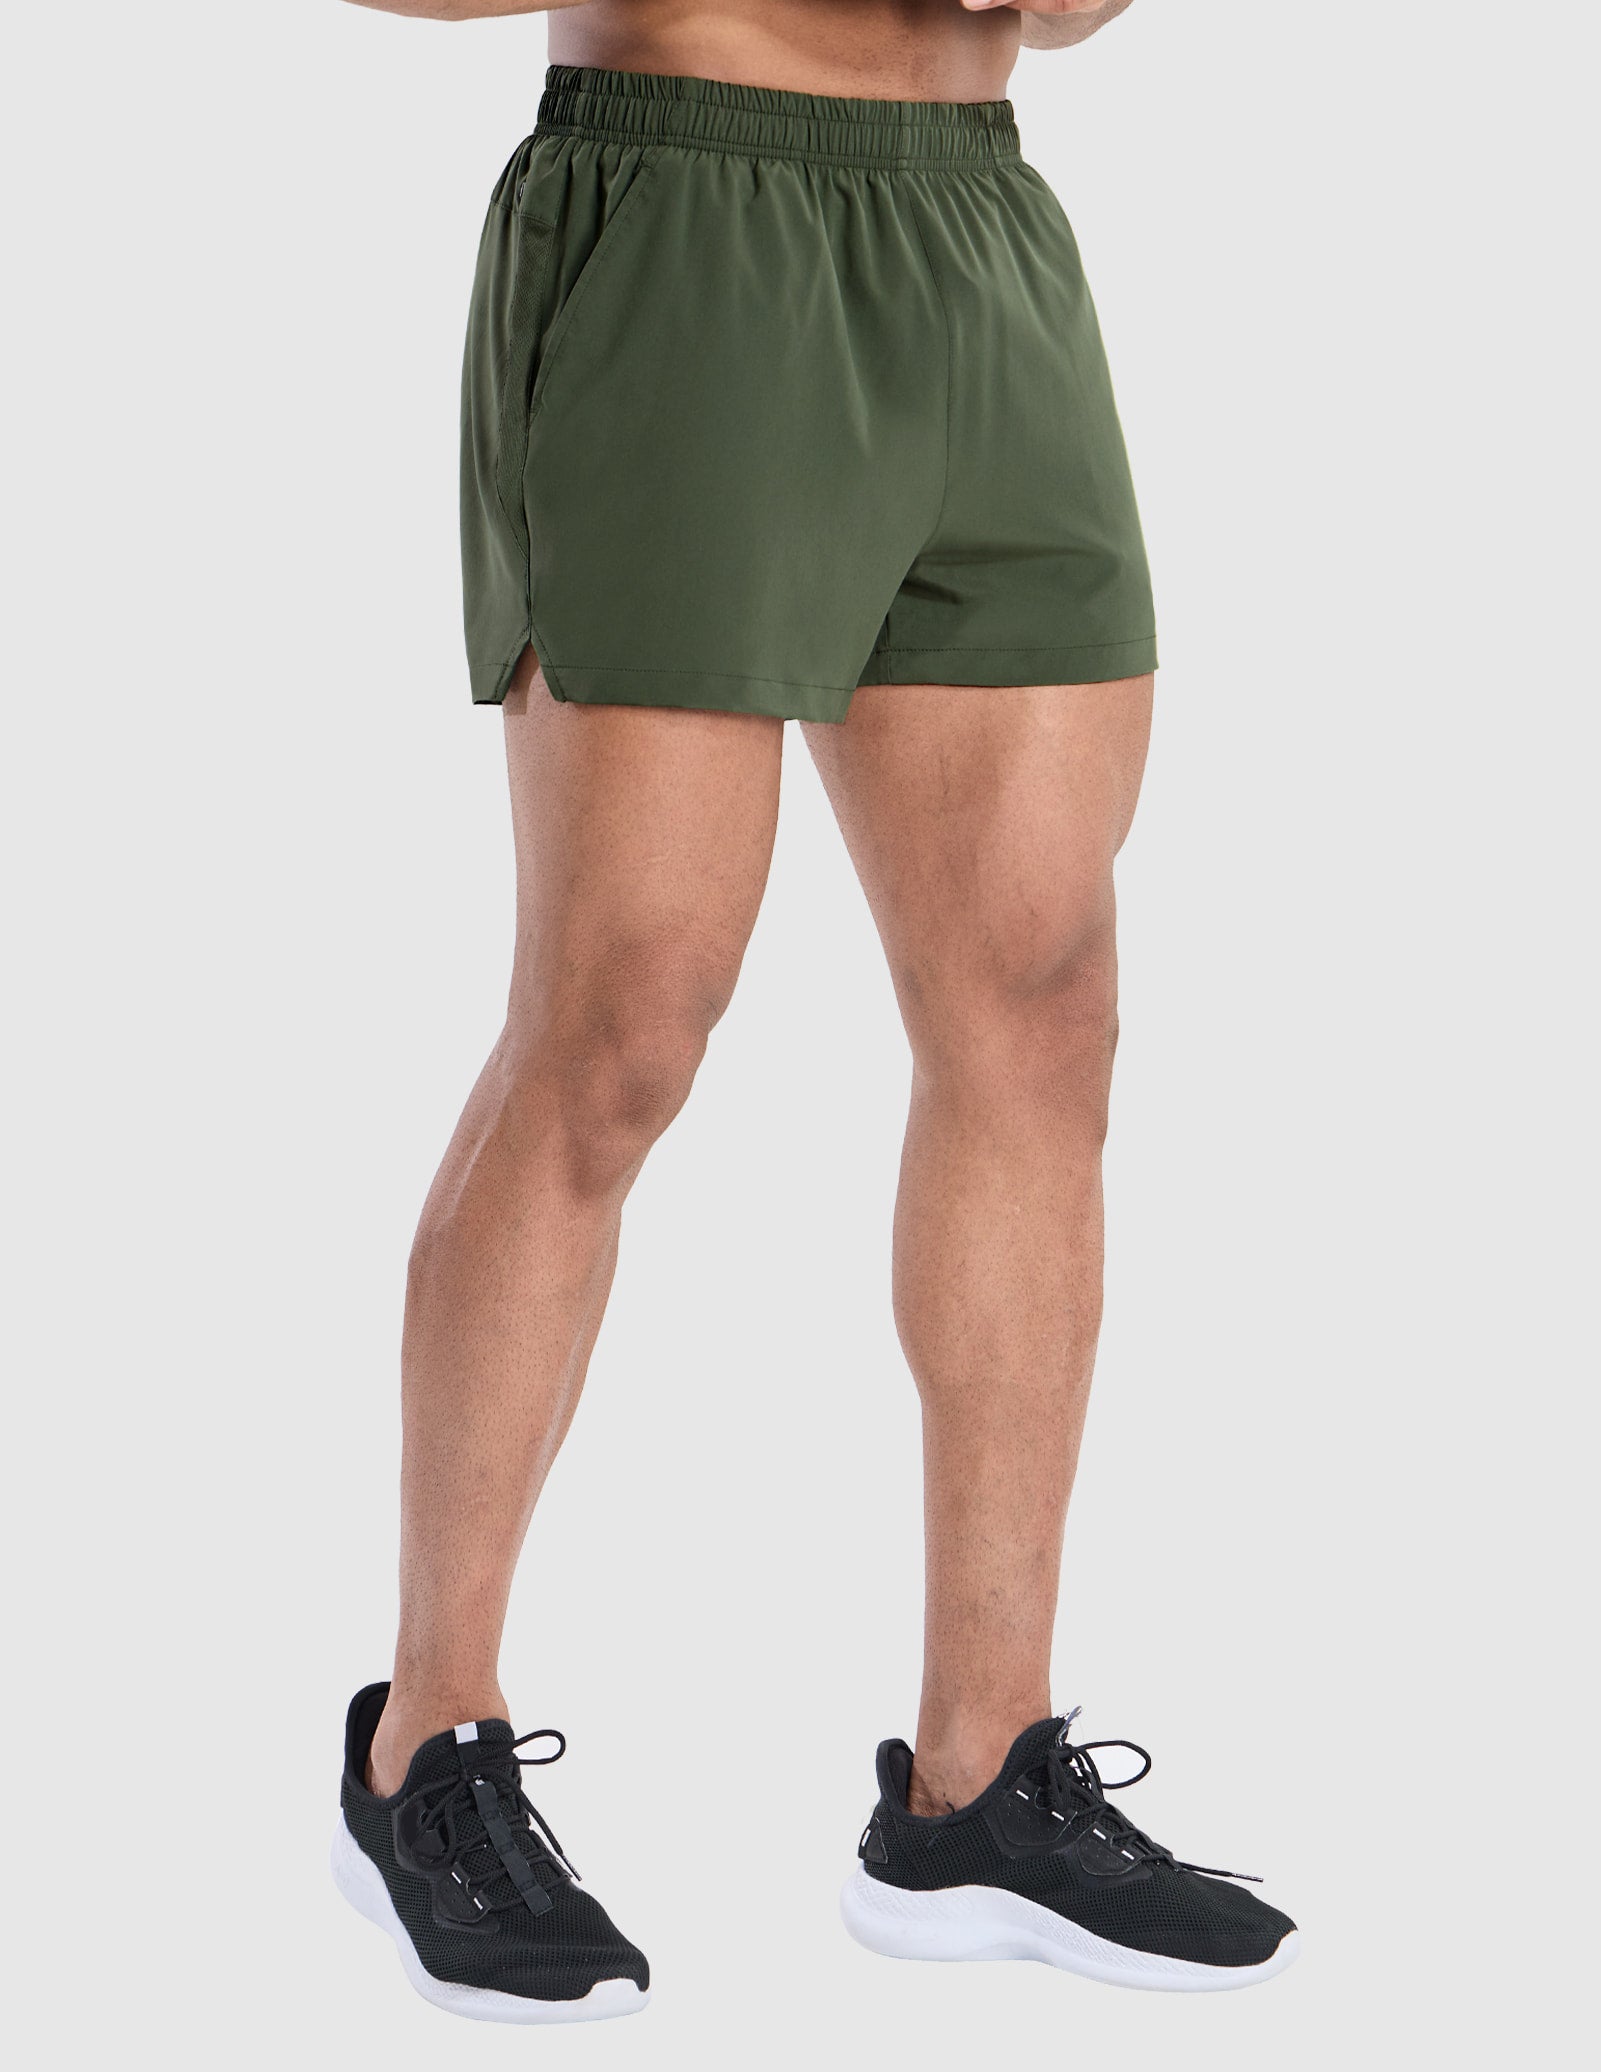 Men's 3 Inch Athletic Shorts with Liner